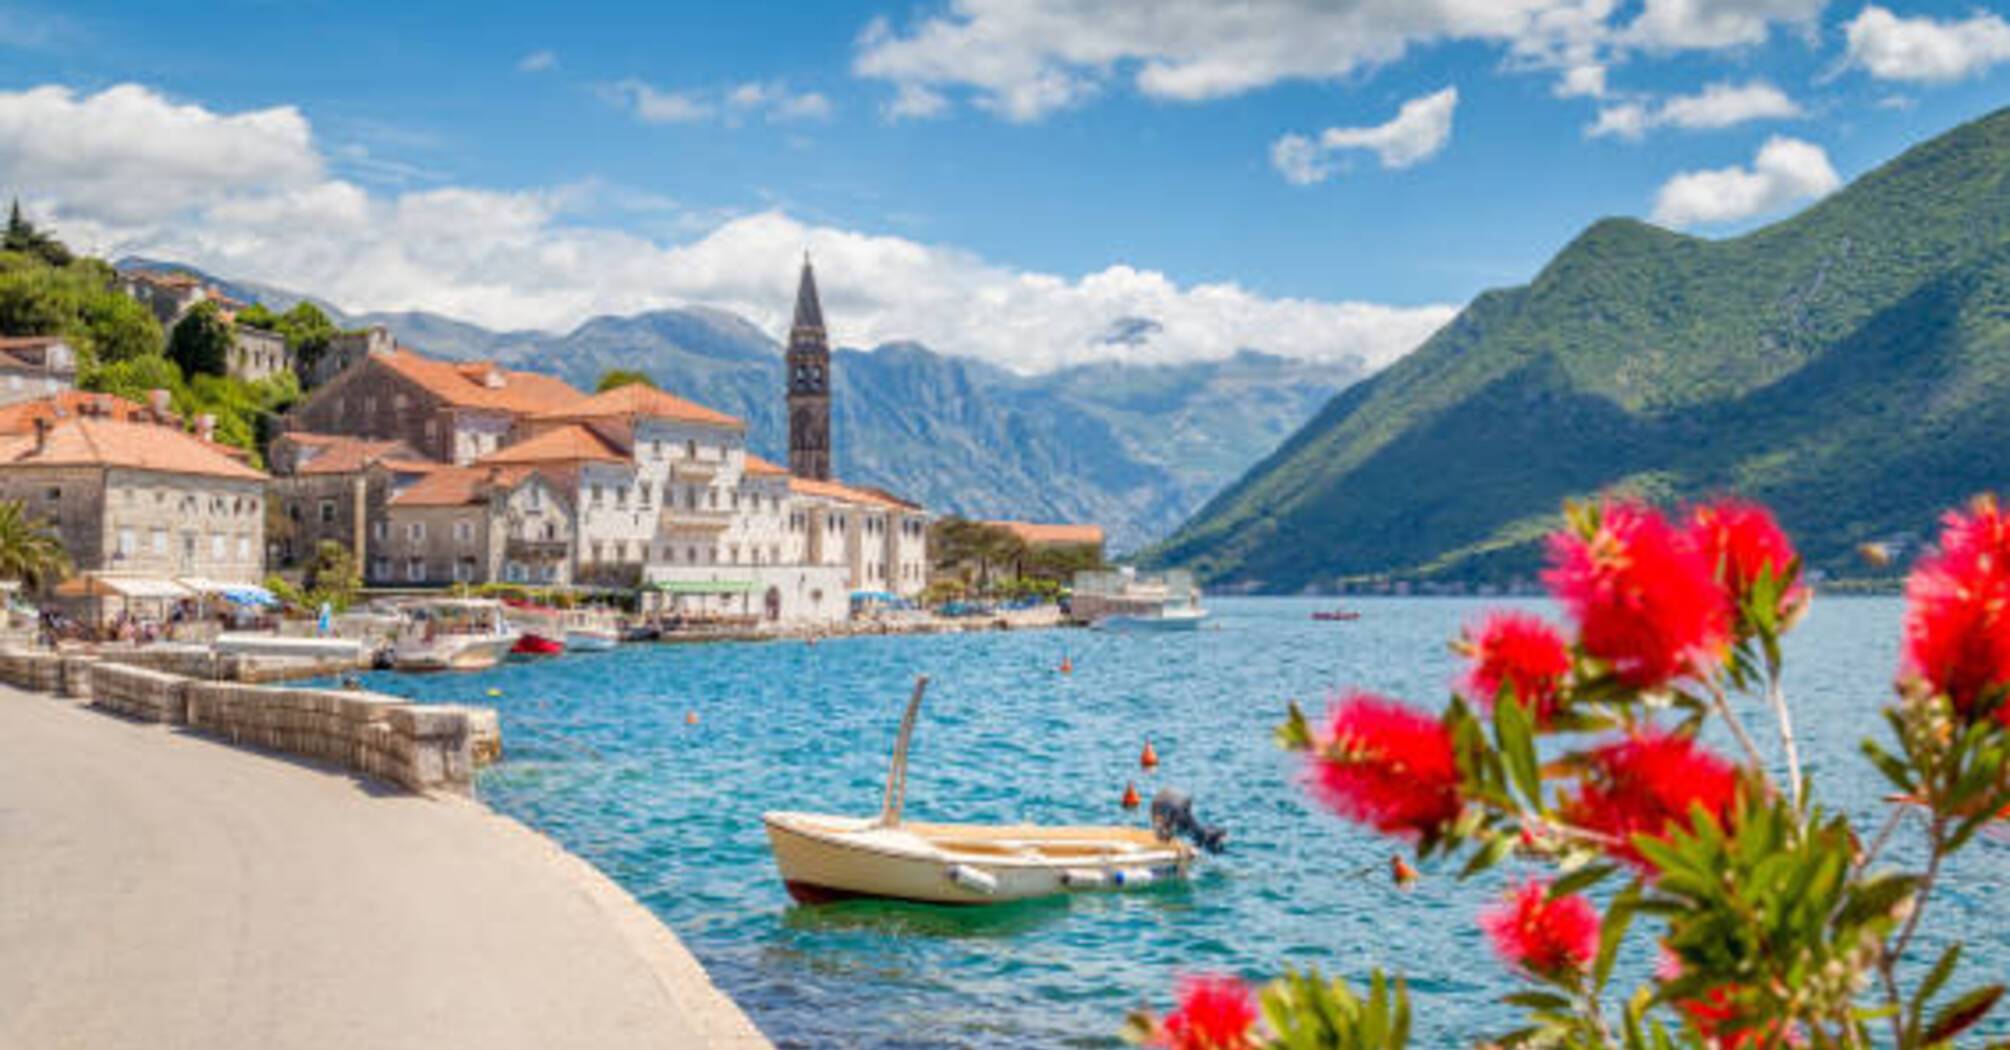 Advantages and disadvantages of living in Montenegro: What expats should prepare for